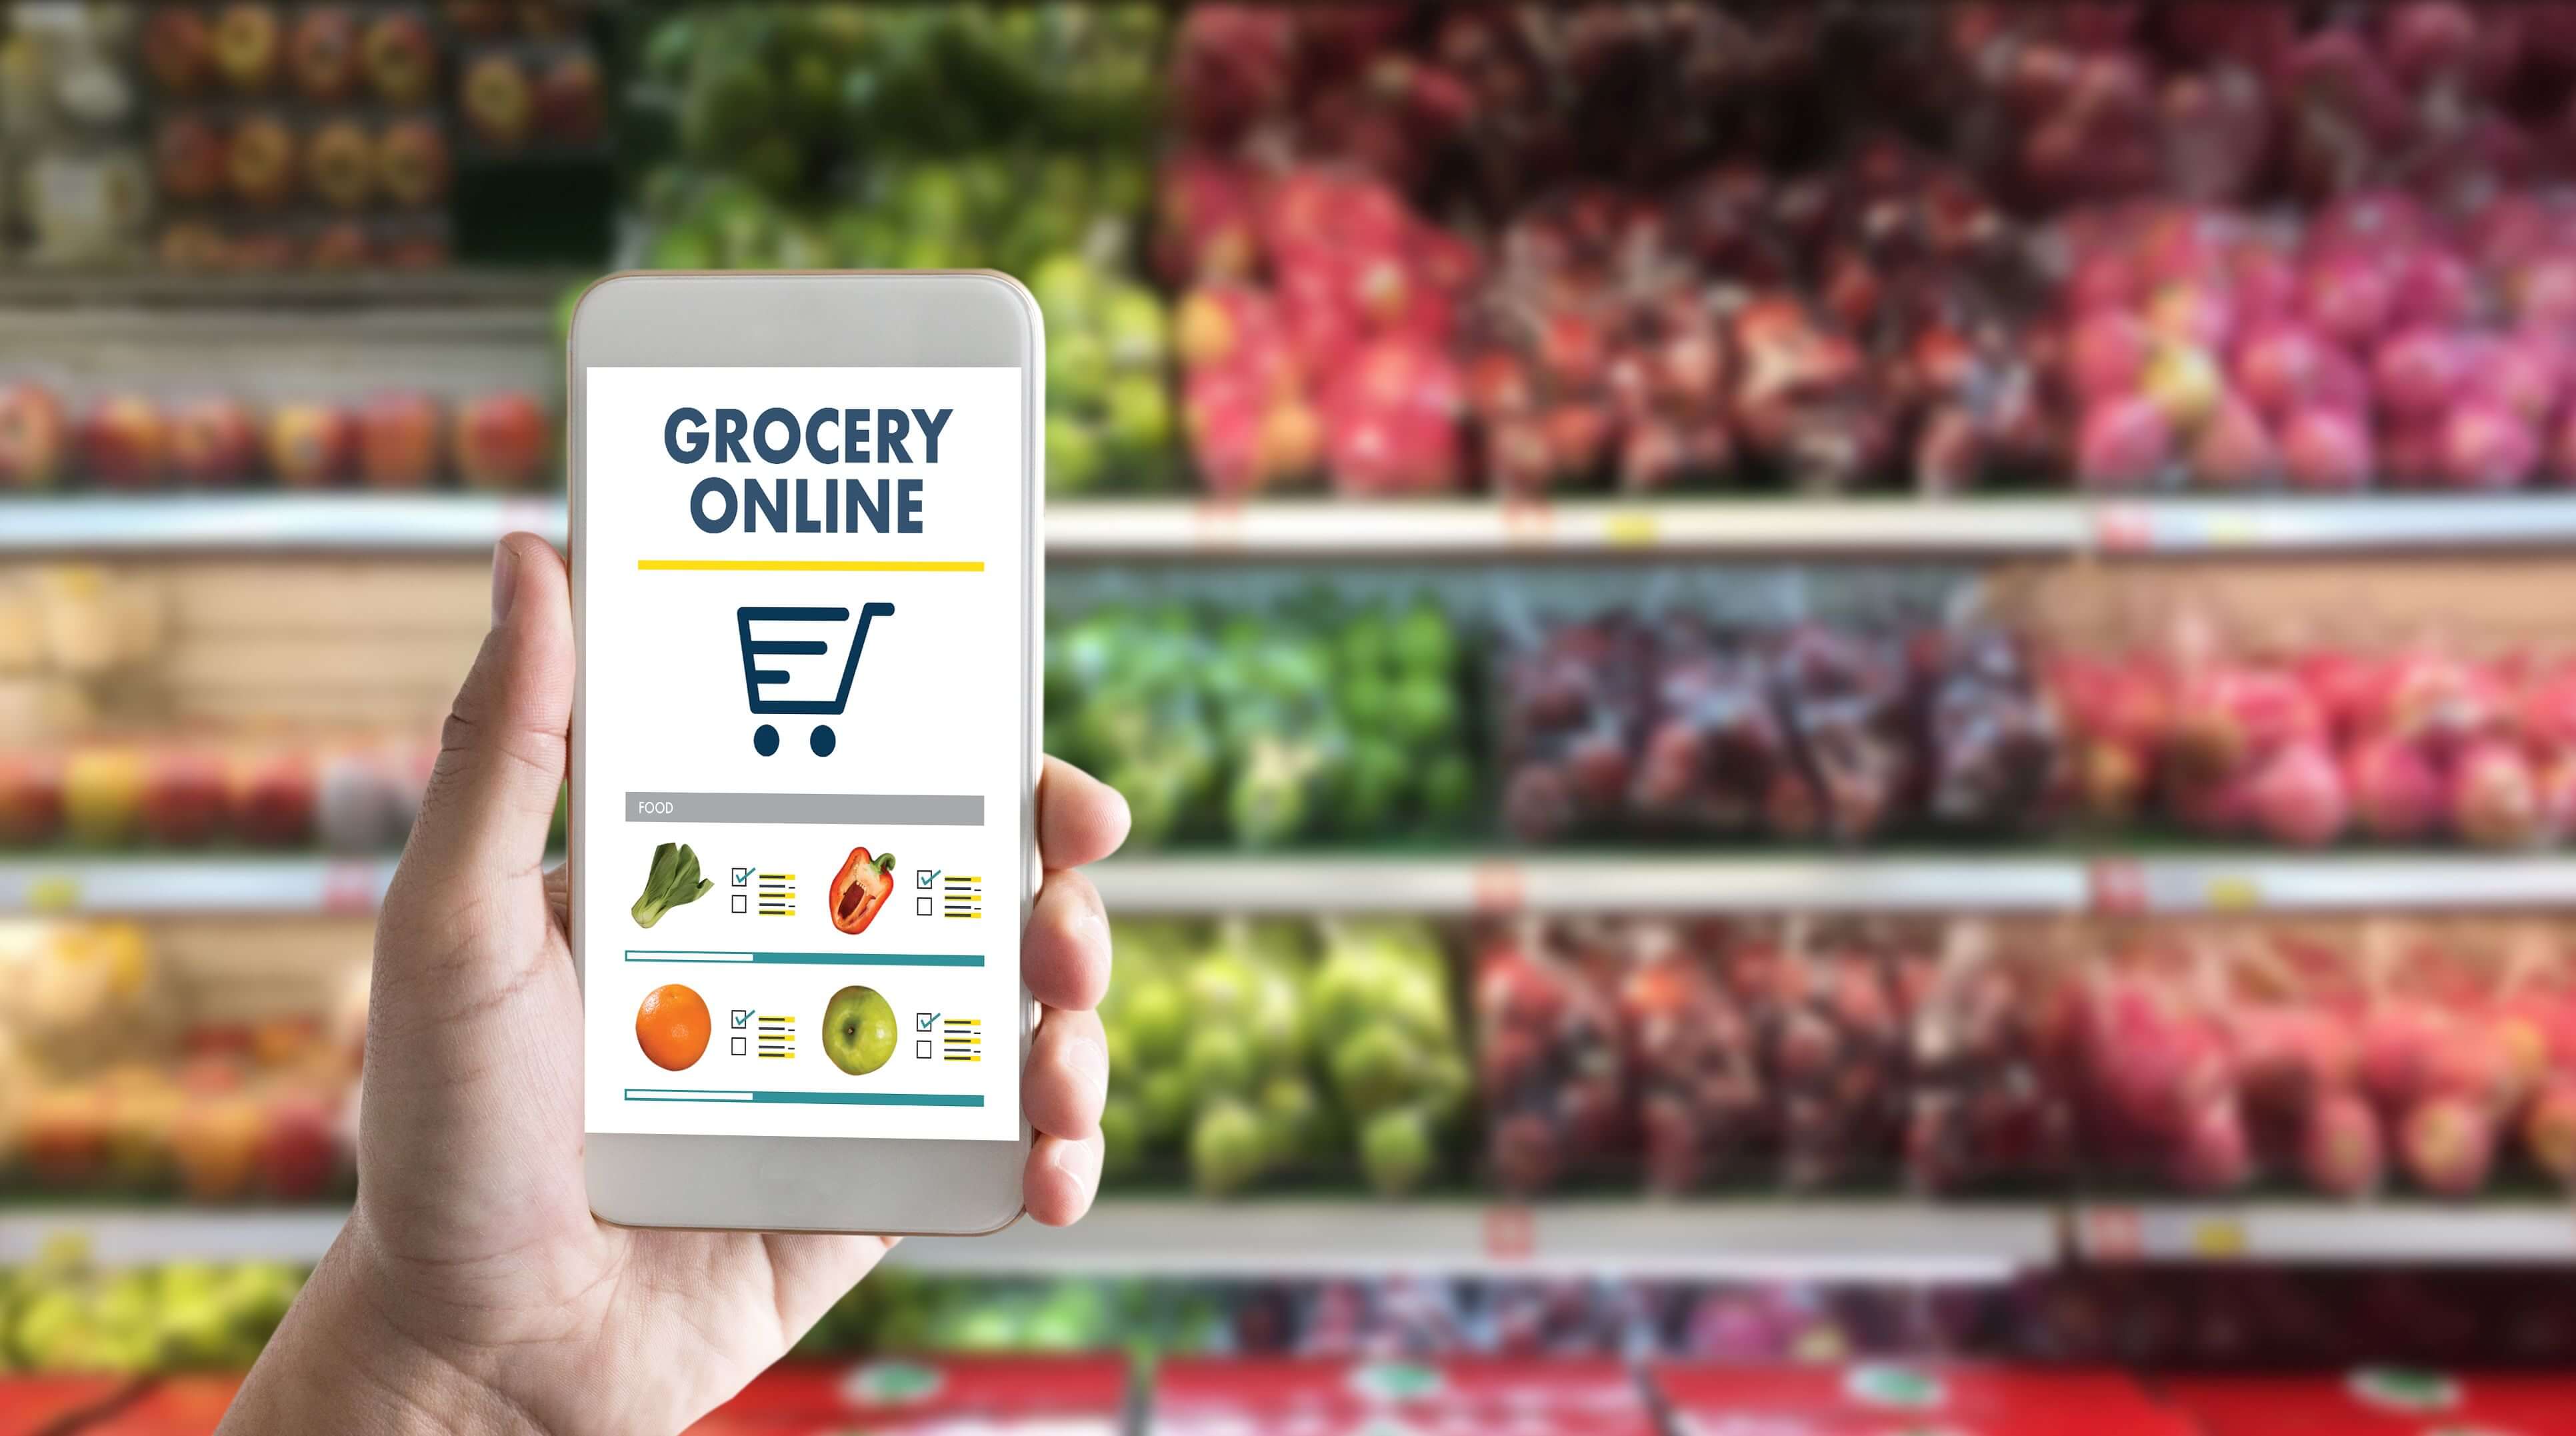 Competitive intelligence for an online grocery player